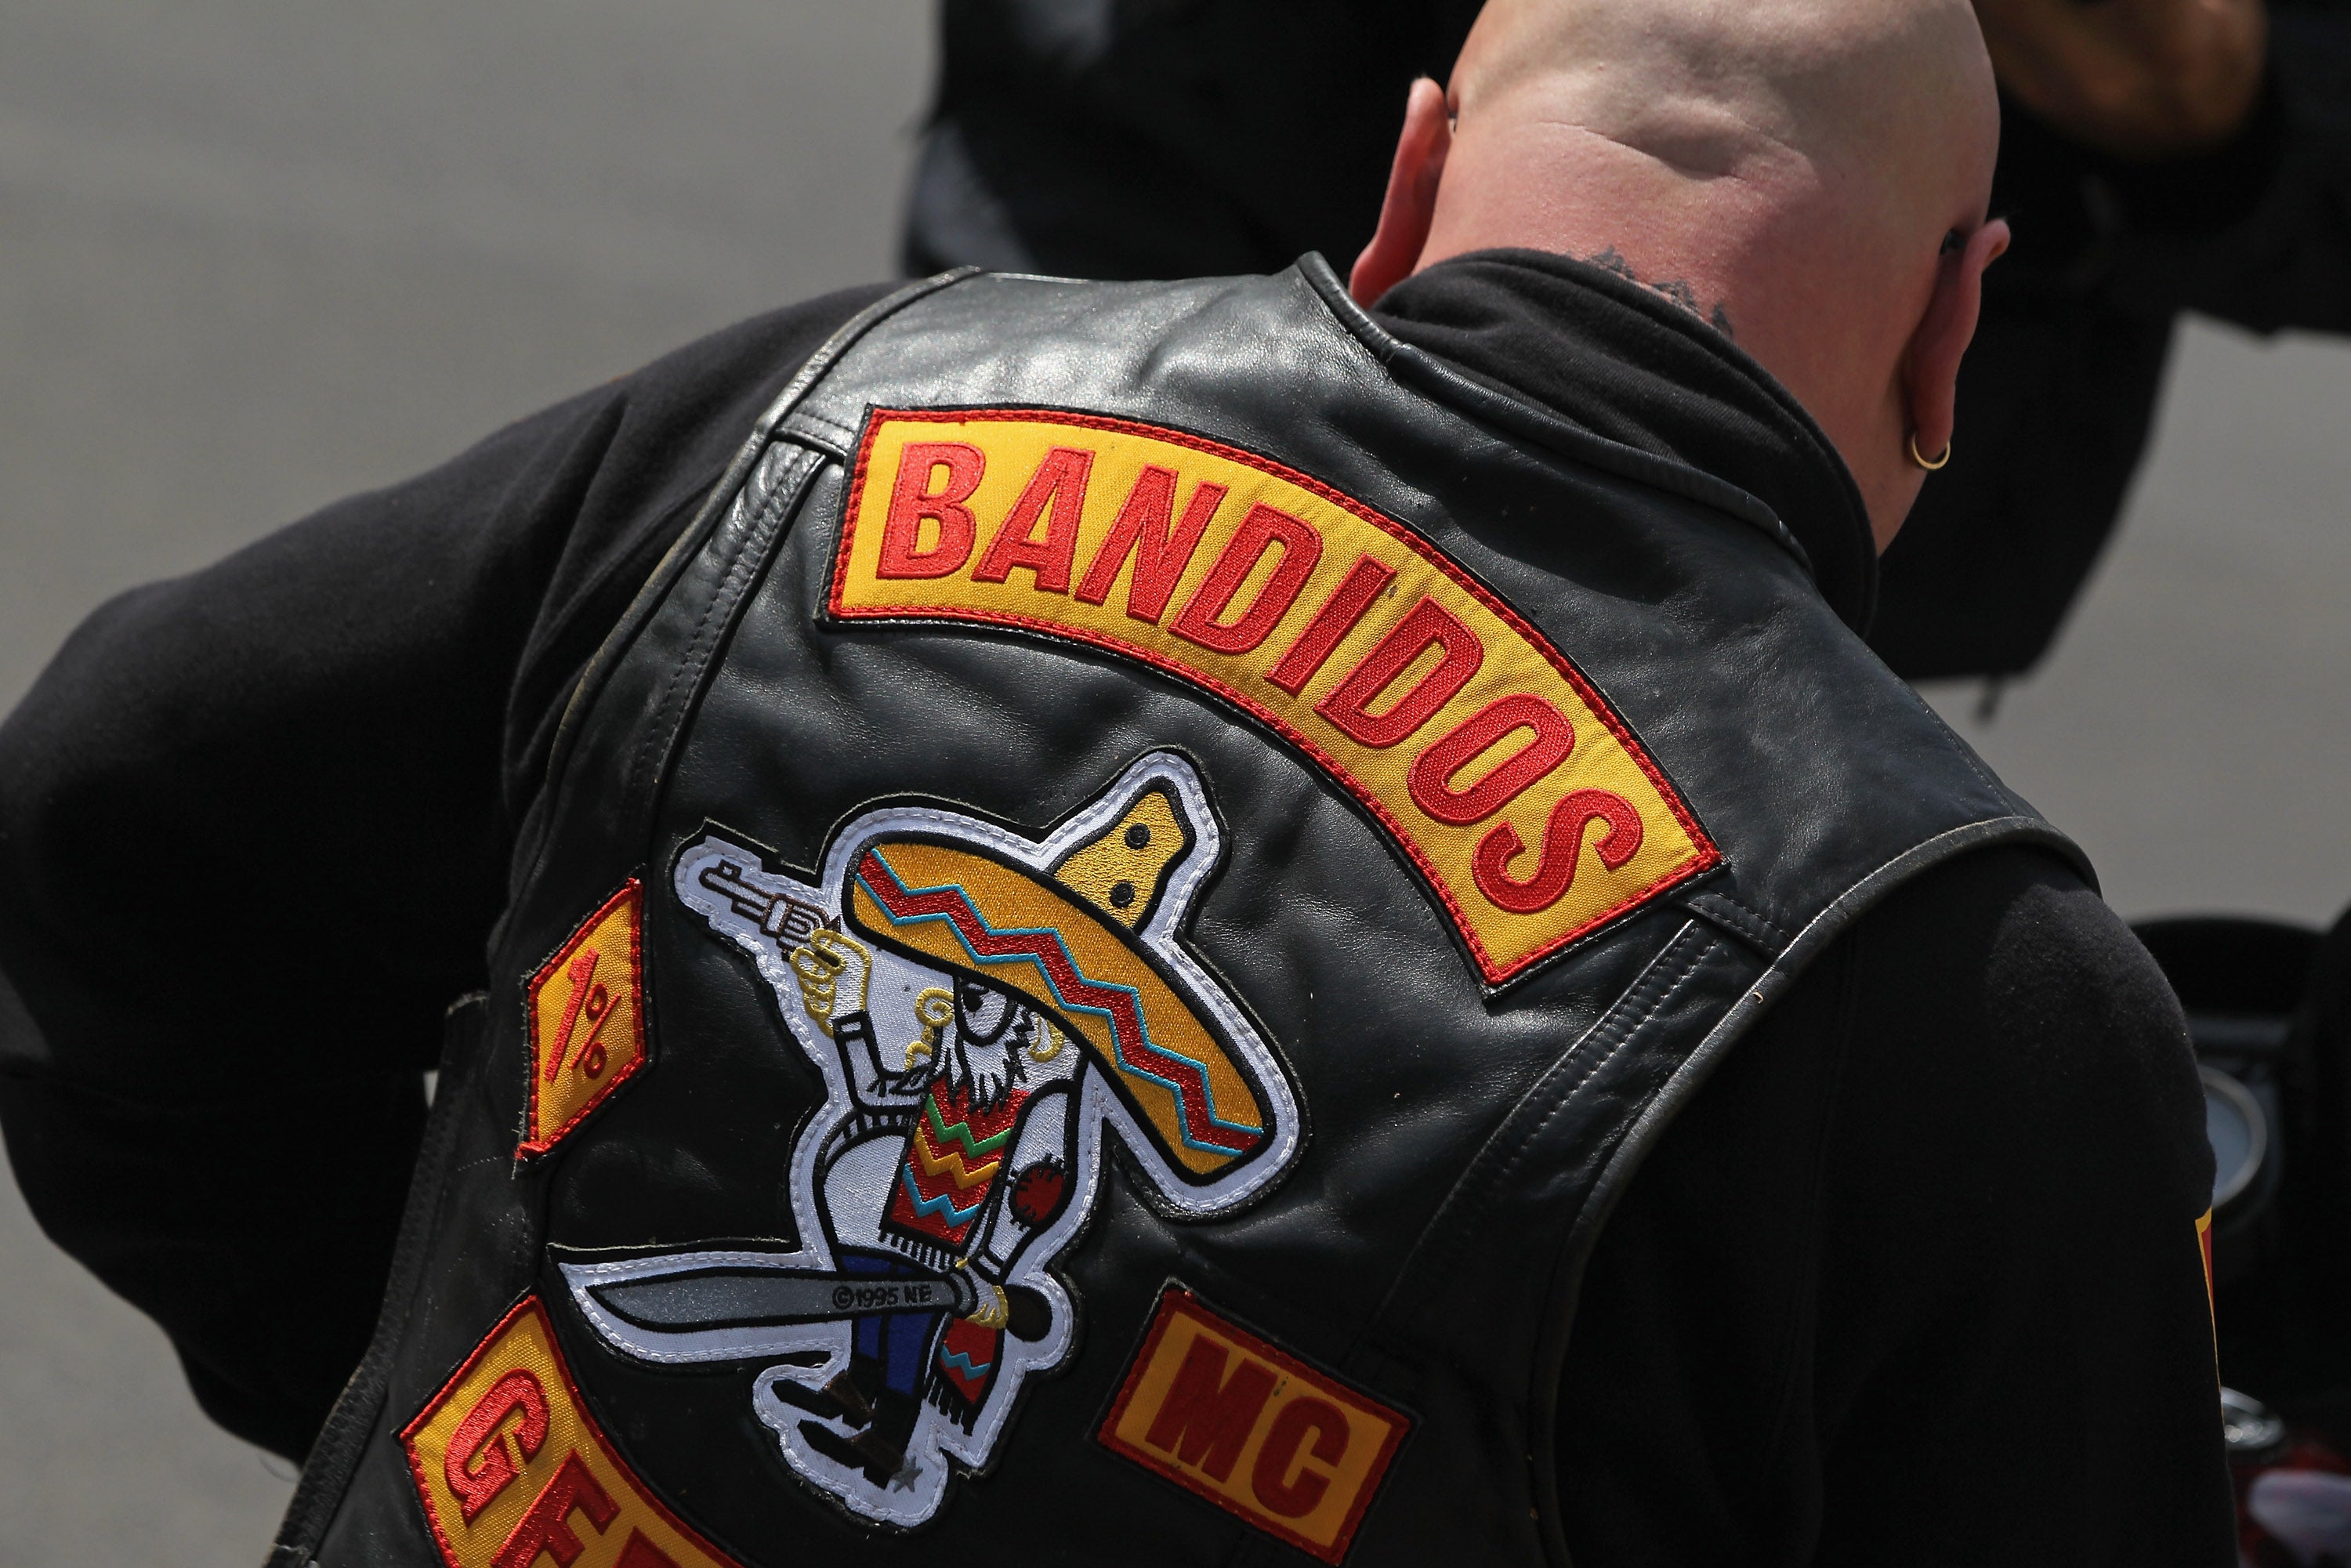 A Bandidos gang member sits on his motorcycle outside a Berlin club in 2011